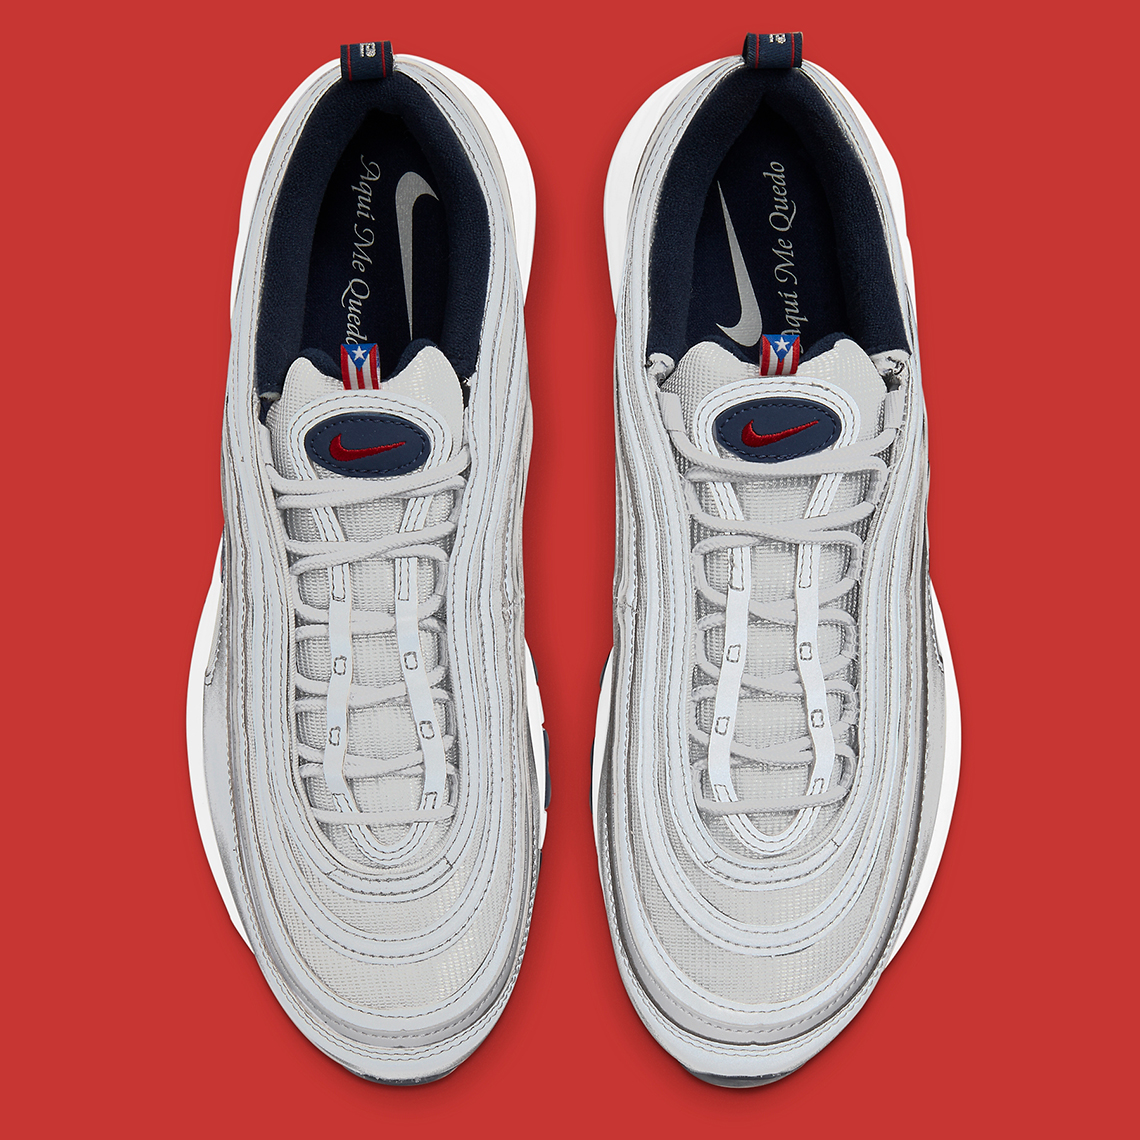 Nike Air Max 97 Puerto Rico Release Reminder 8